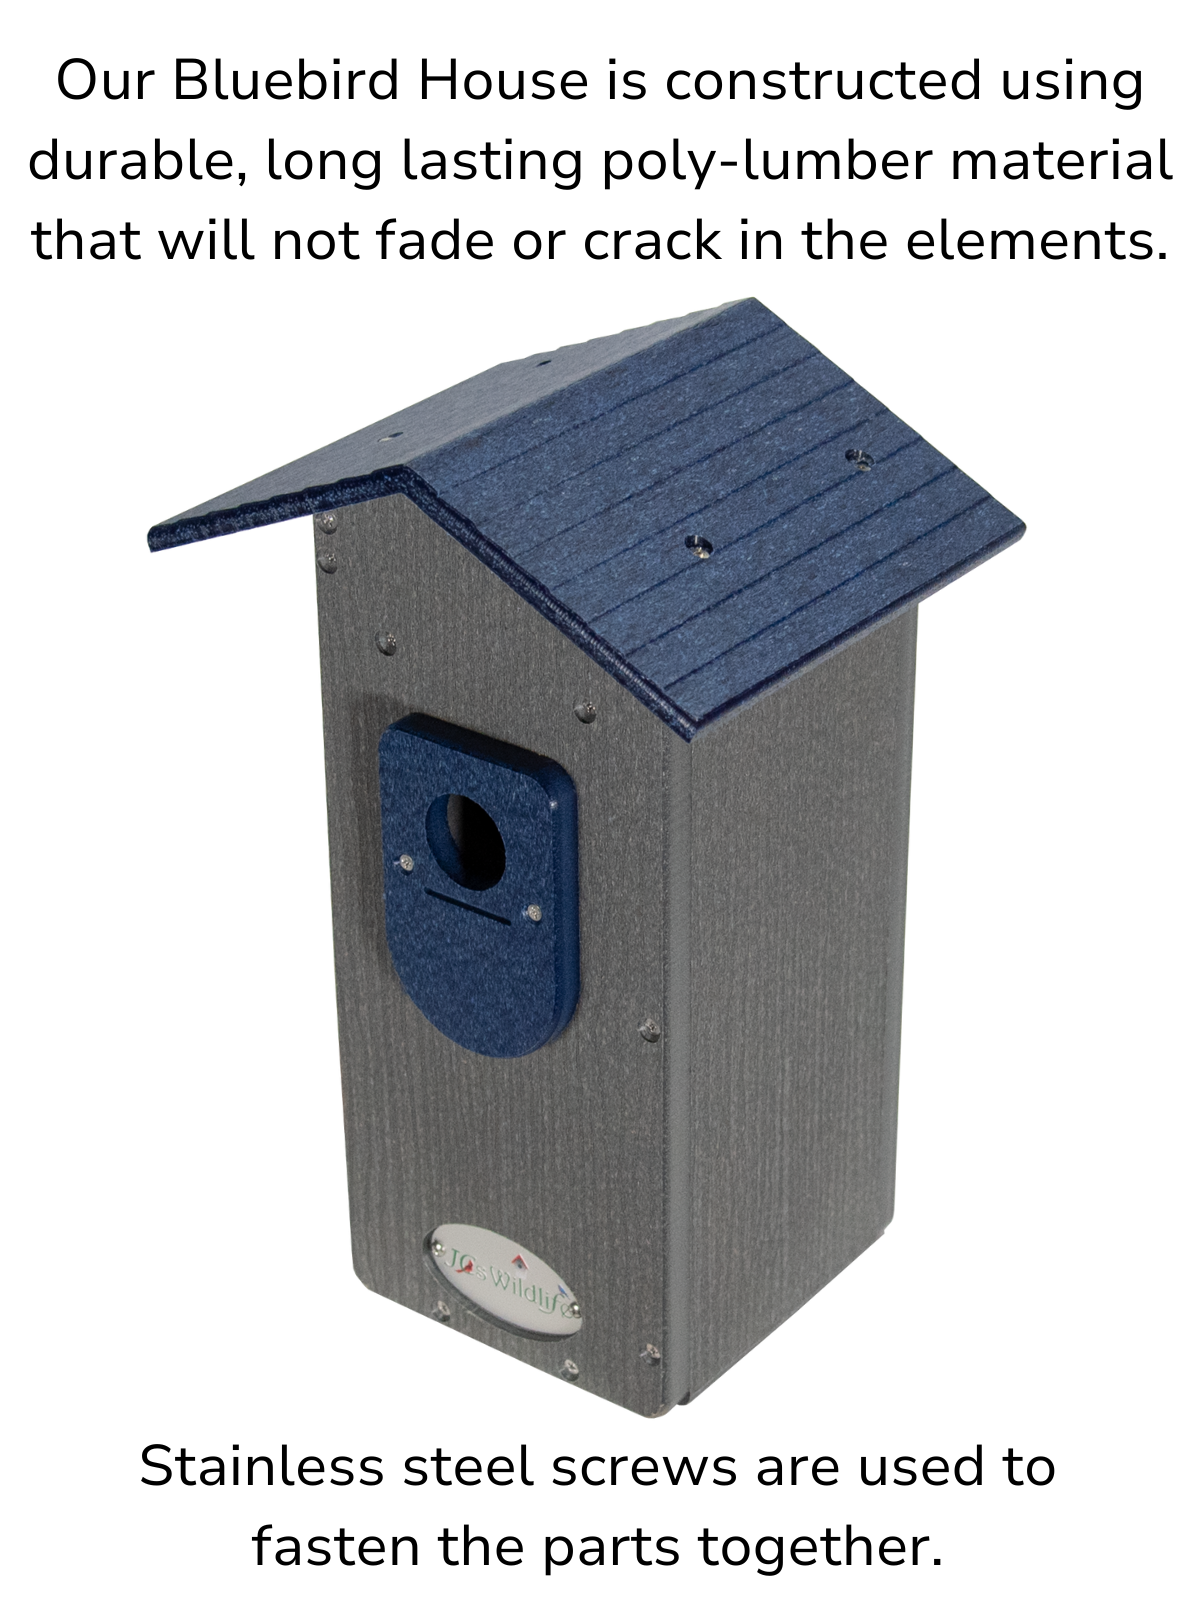 Photo of the bluebird house with text that reads "Our bluebird house is constructed using durable, long lasting poly-lumber material that will not fade or crack in the elements". Text underneath the house reads, "Stainless steel screws are used to fasted the parts together."